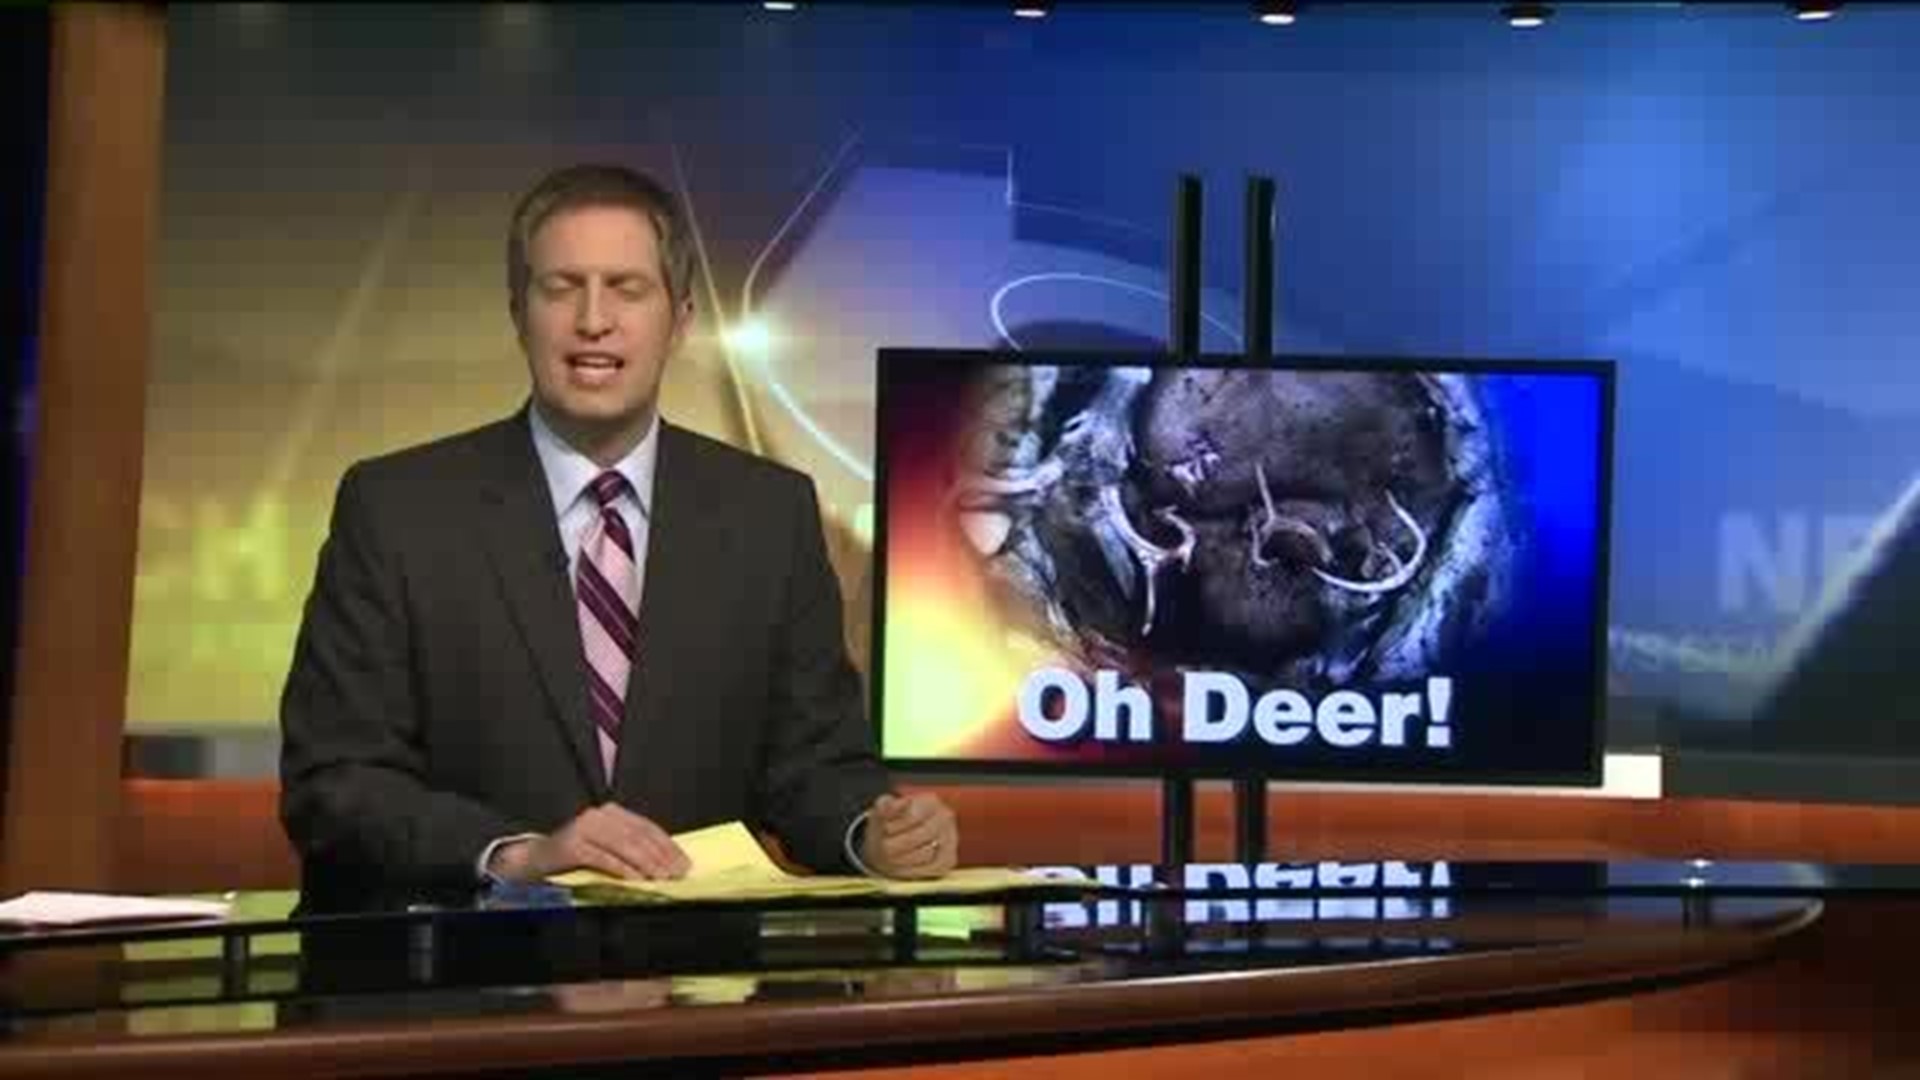 Deer Rescued From Well In Susquehanna County